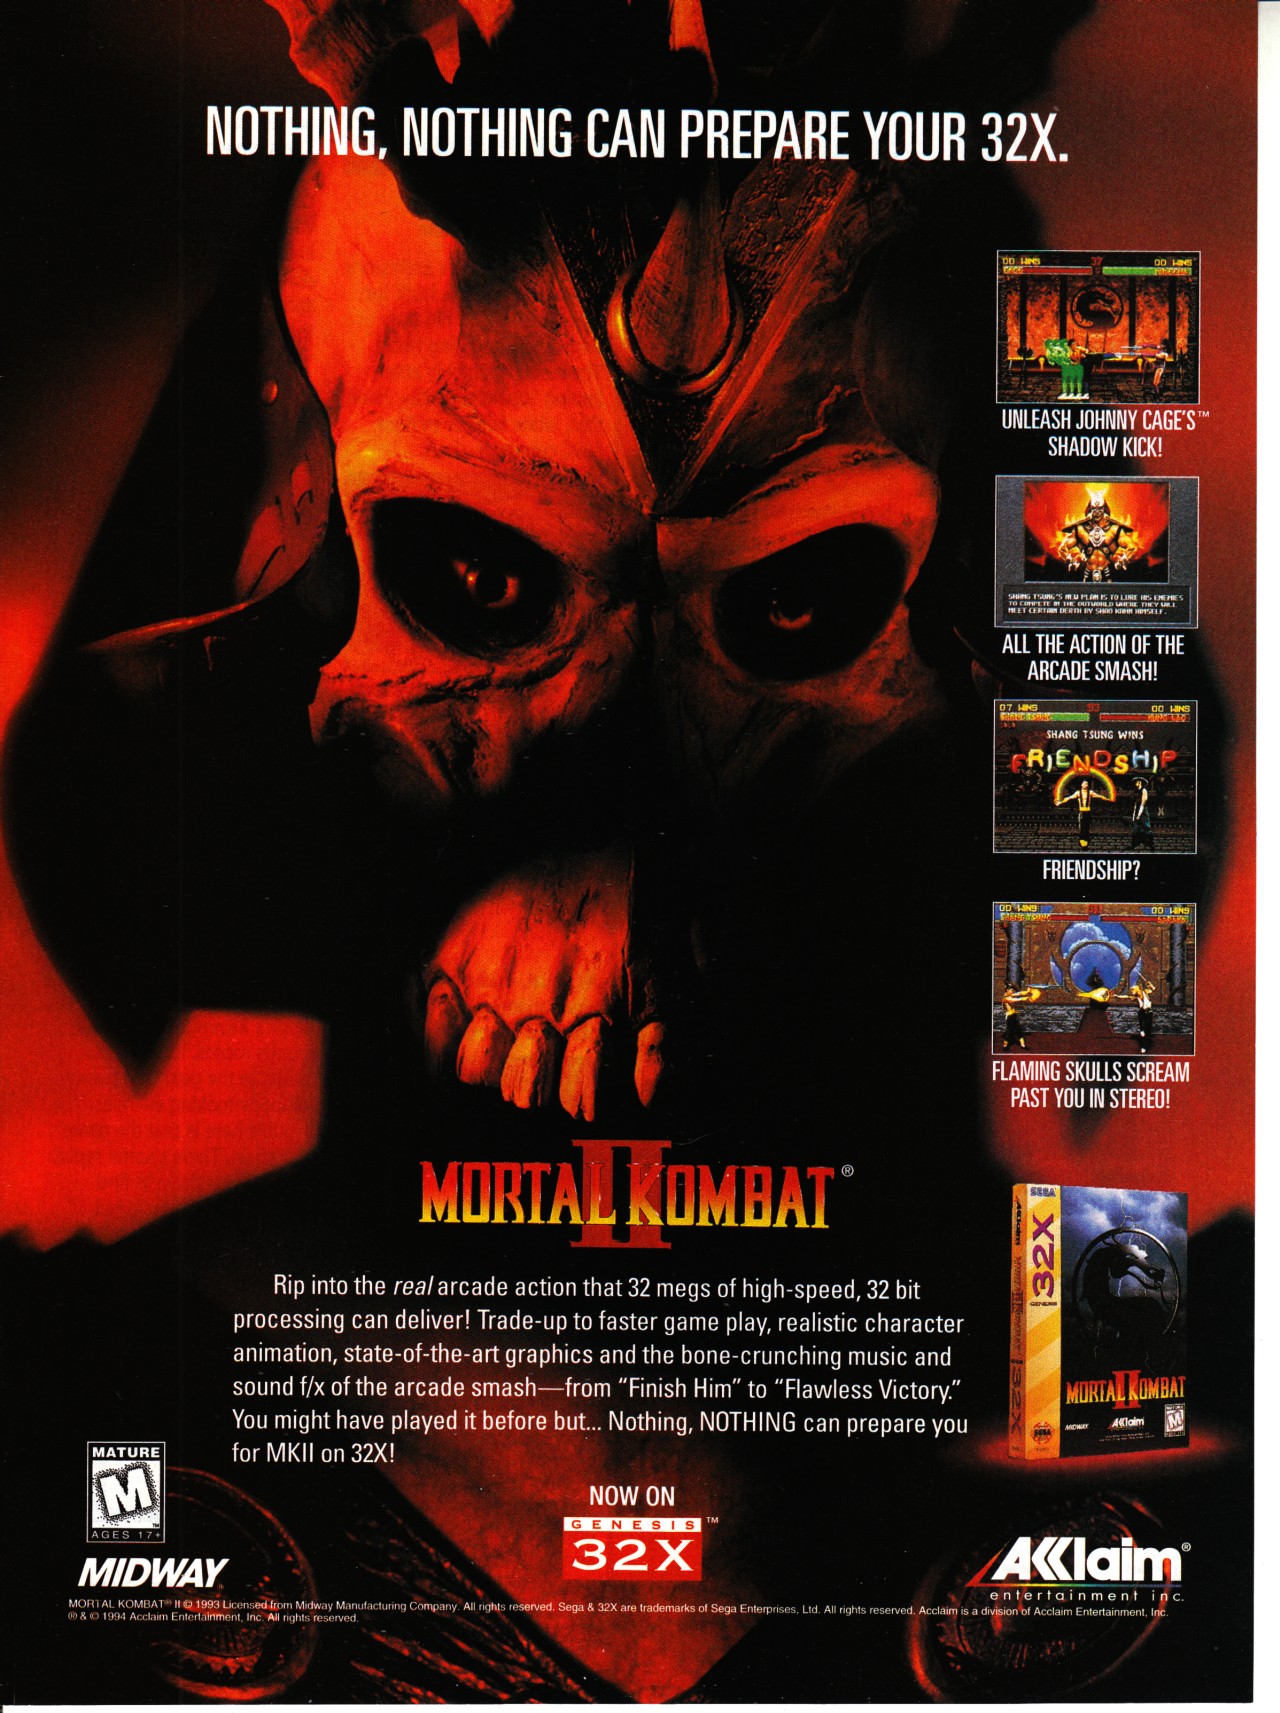 We’re back for 2012. Let’s start the year off with one of the biggest releases of the 16-bit era (and one of the most heavily promoted, too). Mortal Kombat II […]